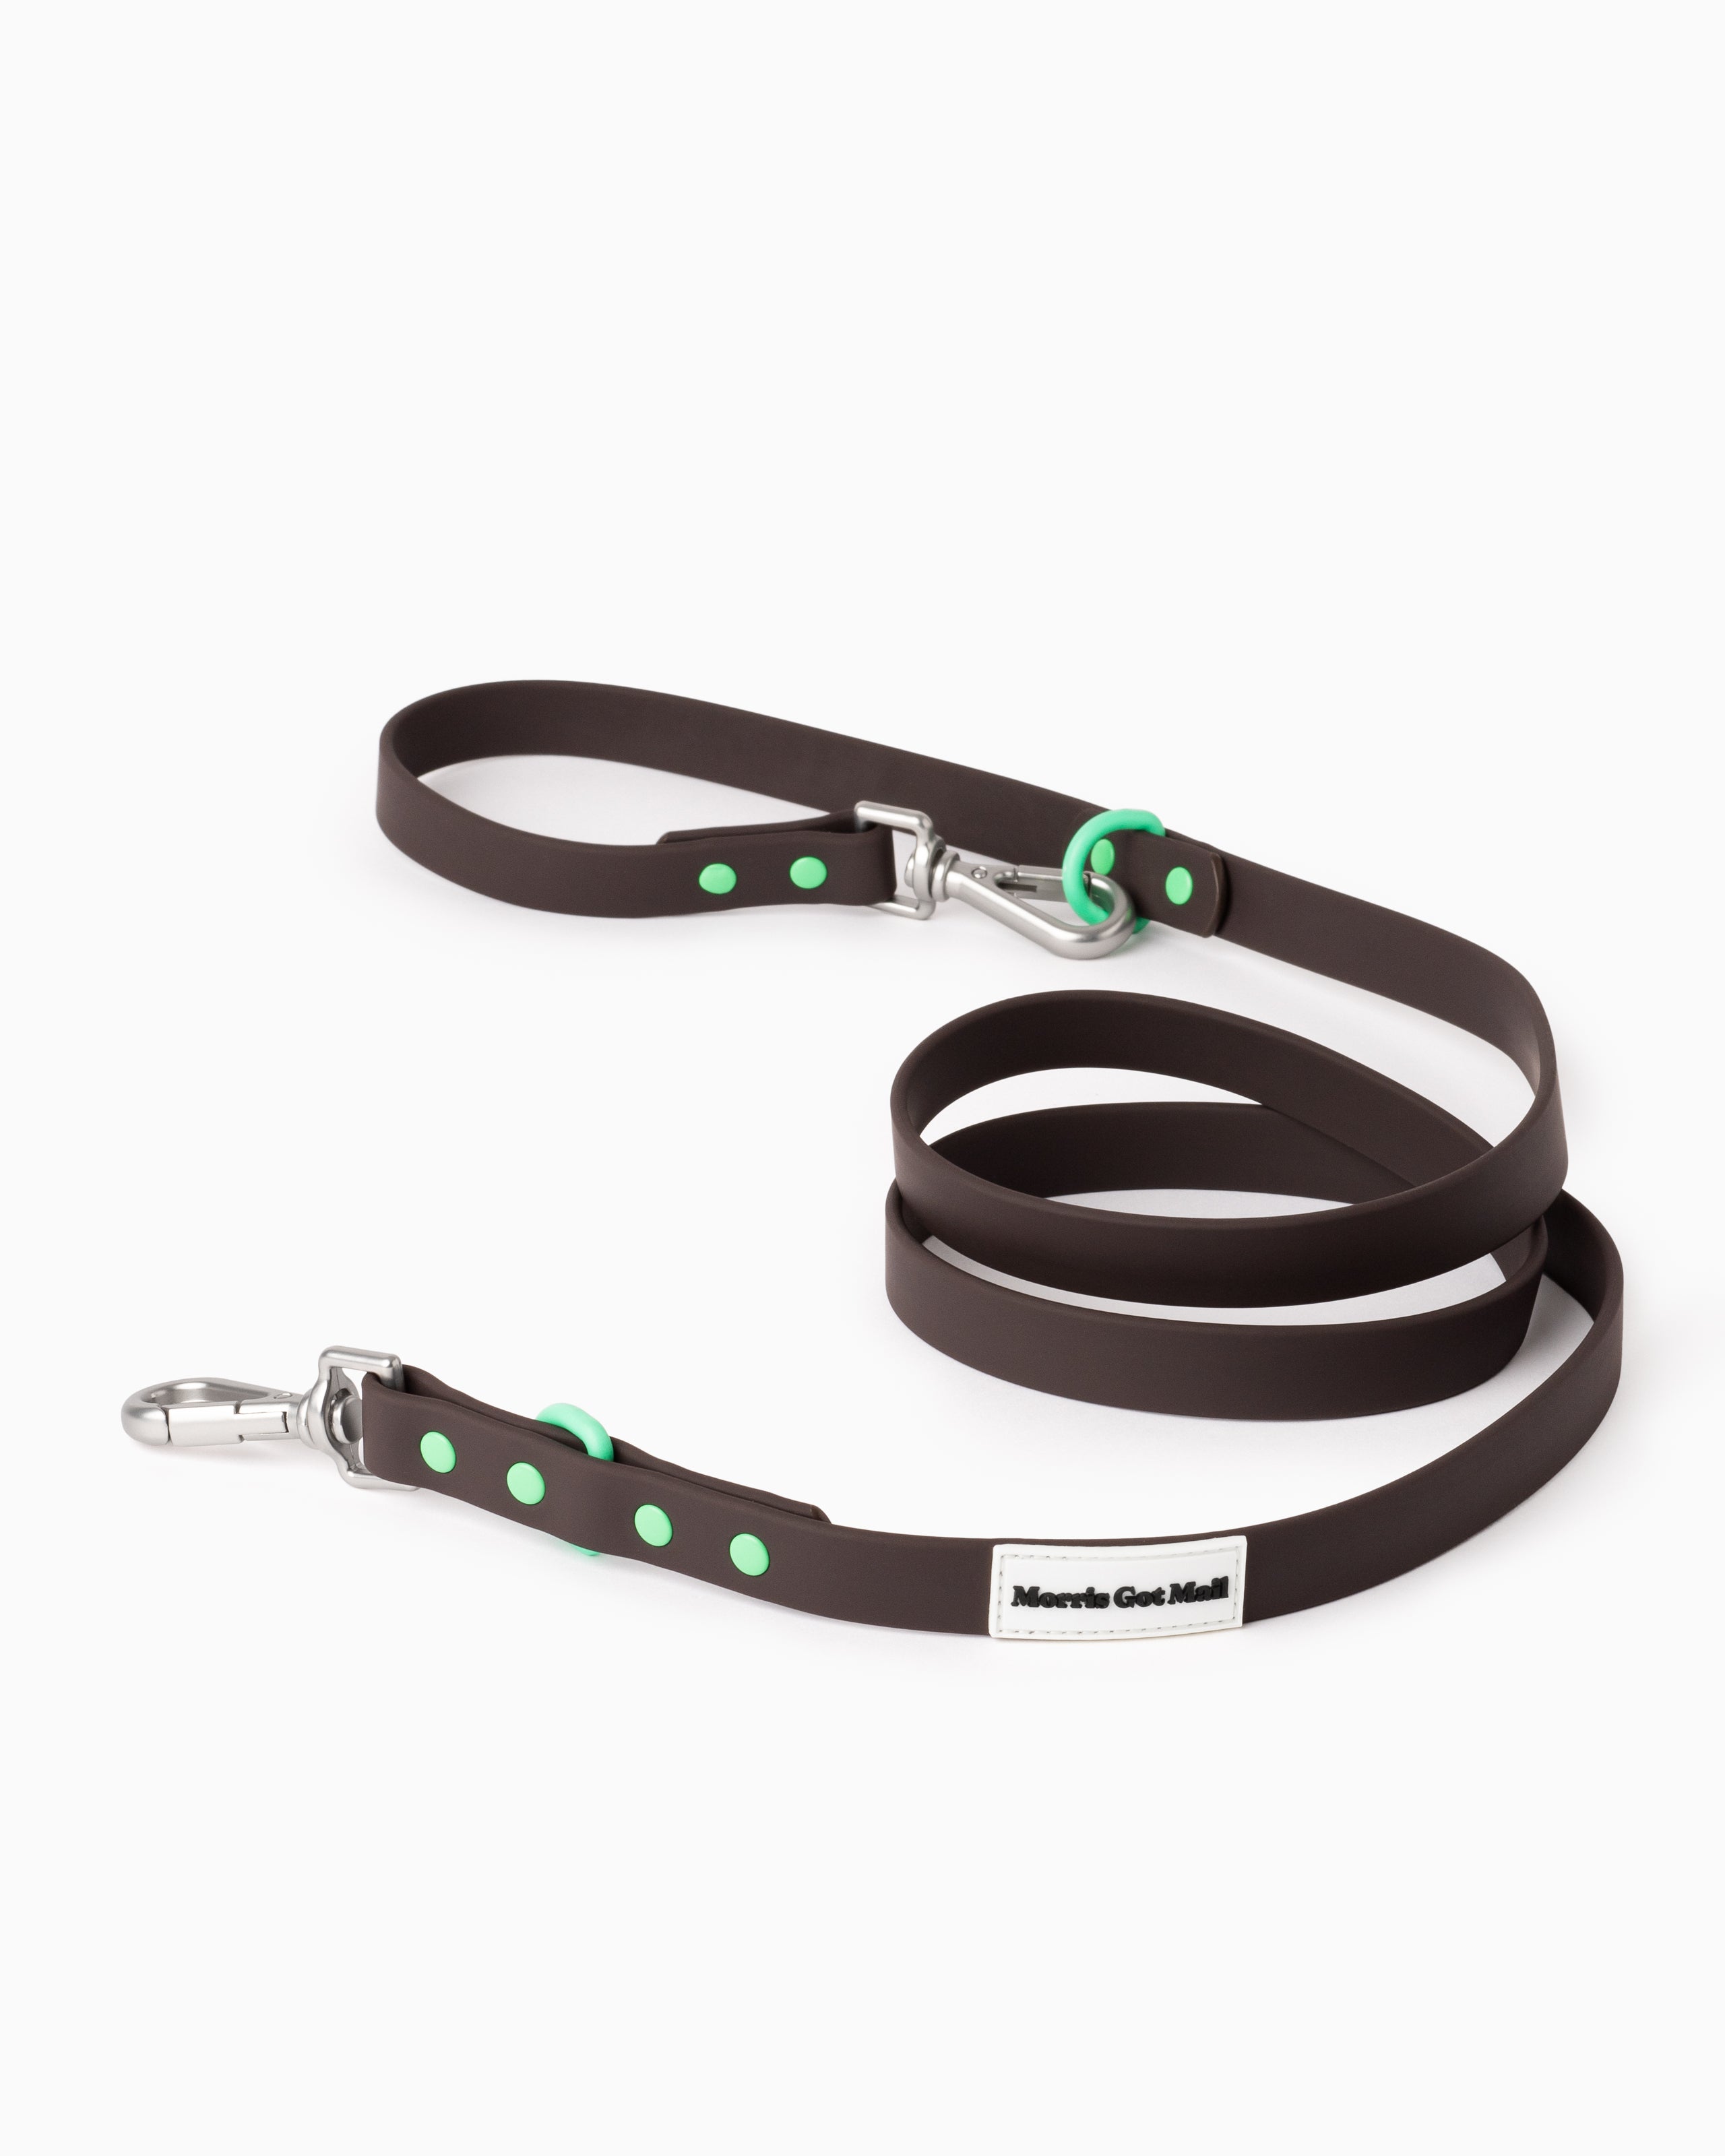 Dark brown waterproof & odor resistant dog leash with a two tone colorblock design, two length options, a handle, carbon coated steel hardware, & zinc alloy attachment hooks.